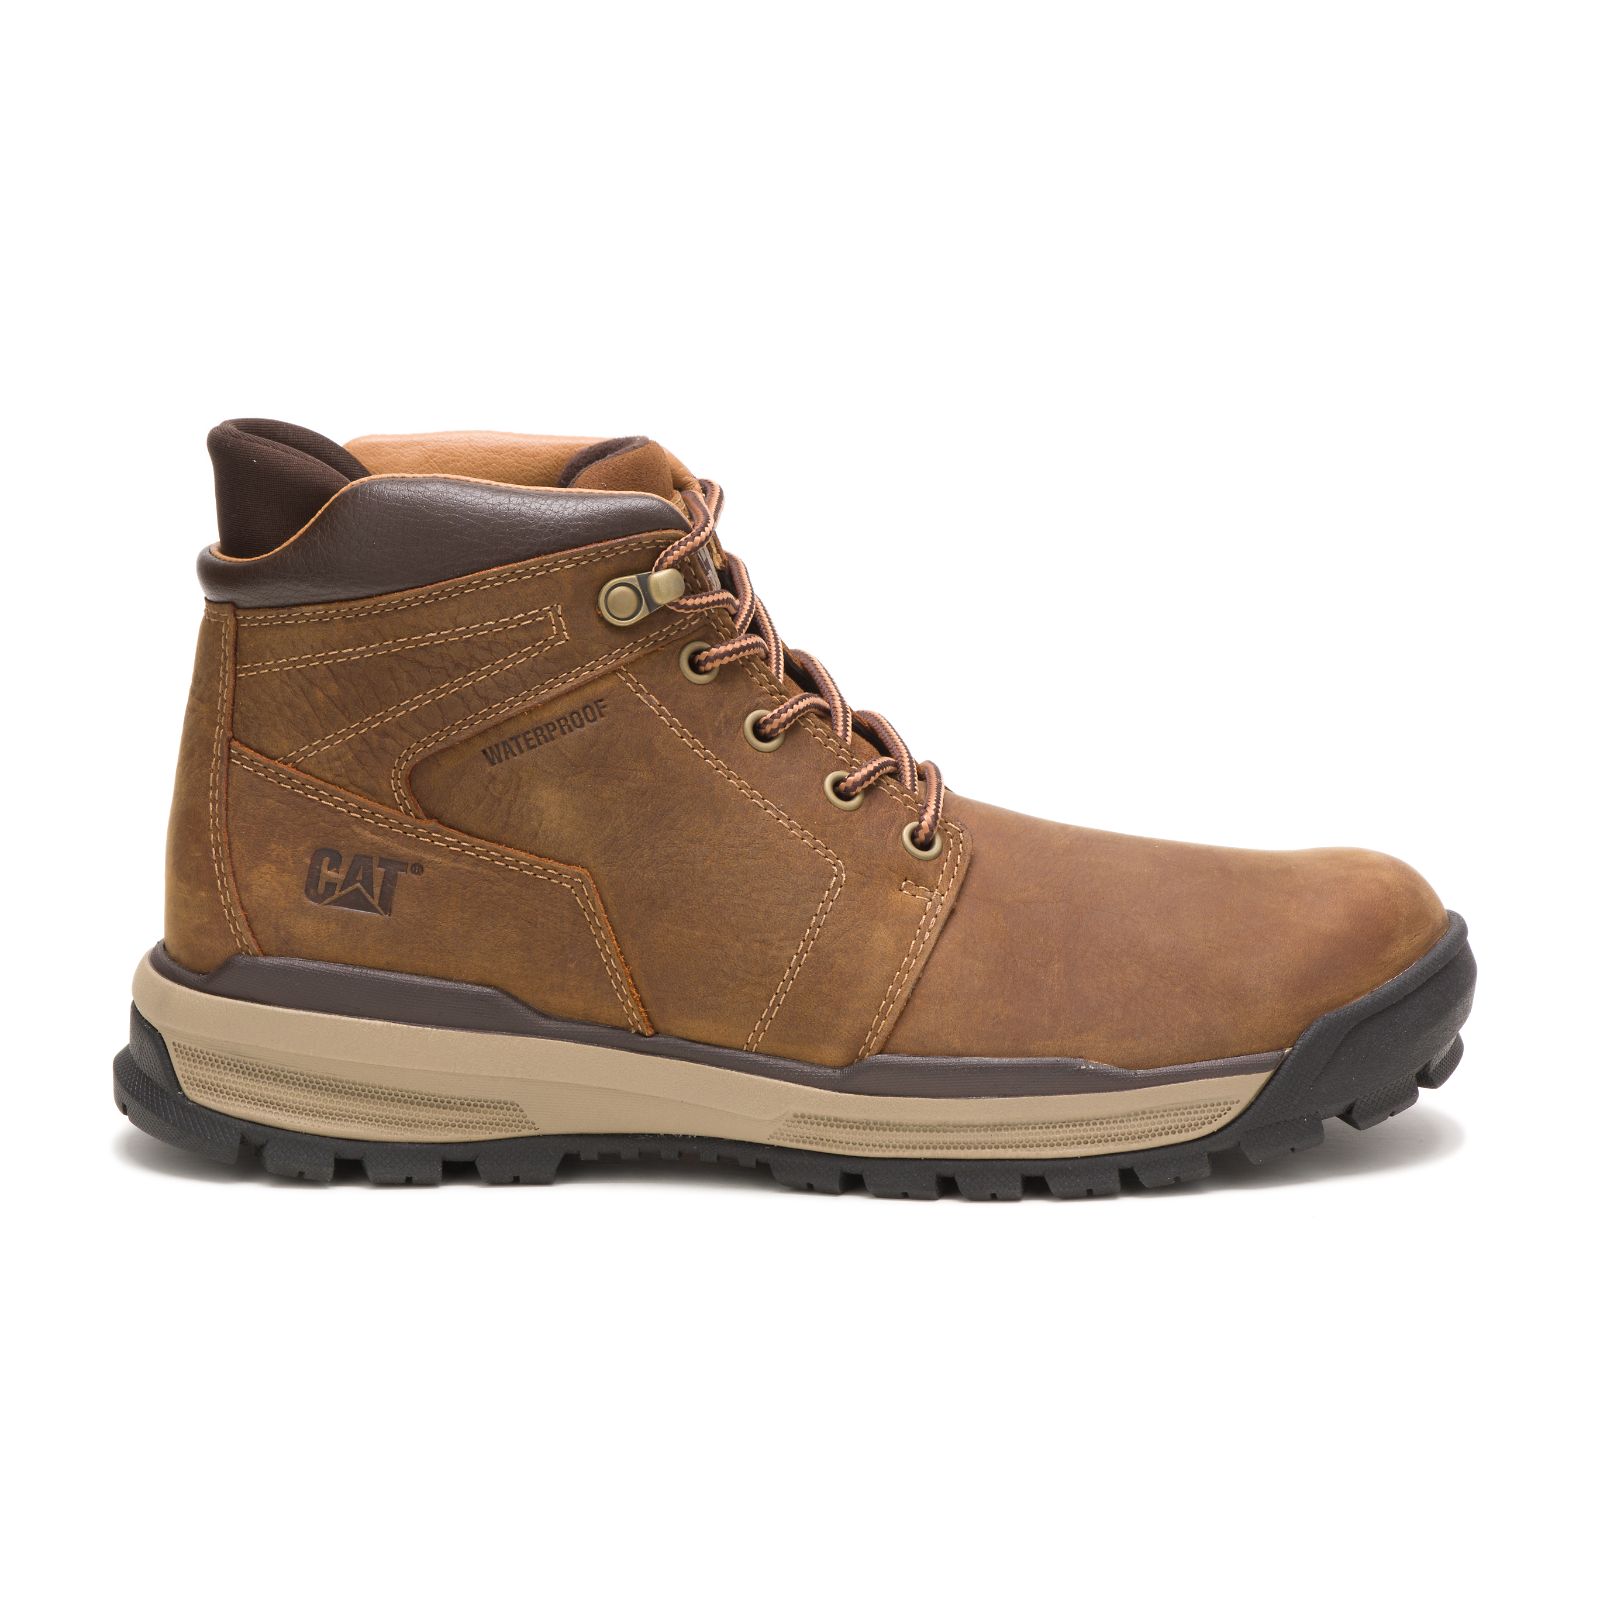 Caterpillar Boots Sale - Caterpillar Cohesion Ice+ Waterproof Thinsulate™ Mens Casual Boots Brown (670814-MUH)